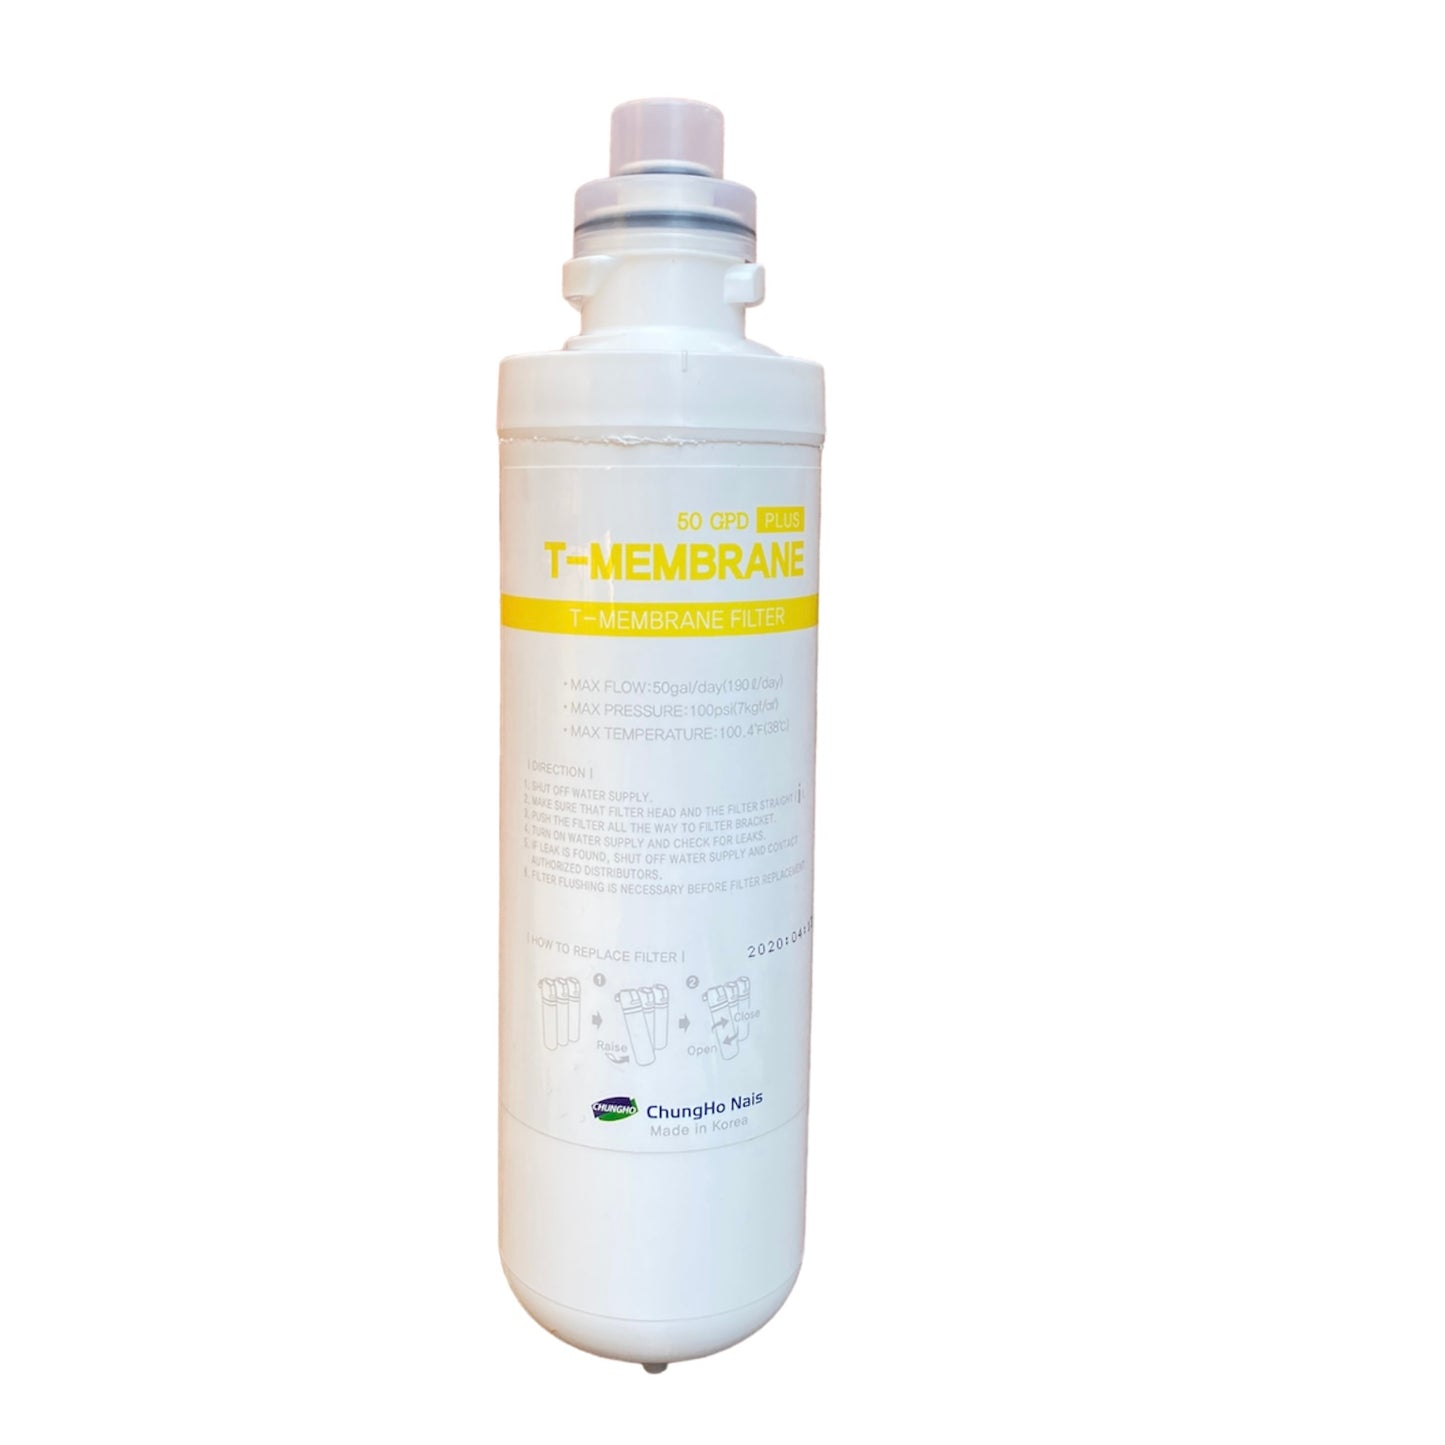 T-Membrane 50 GPD für Osmose Wasserfilter Tiny, Pinguin II, WHI Caffee, Ambient, Omni, CHP-3960DL, CHP-3931D, CHP-4030D, CHP-5230S